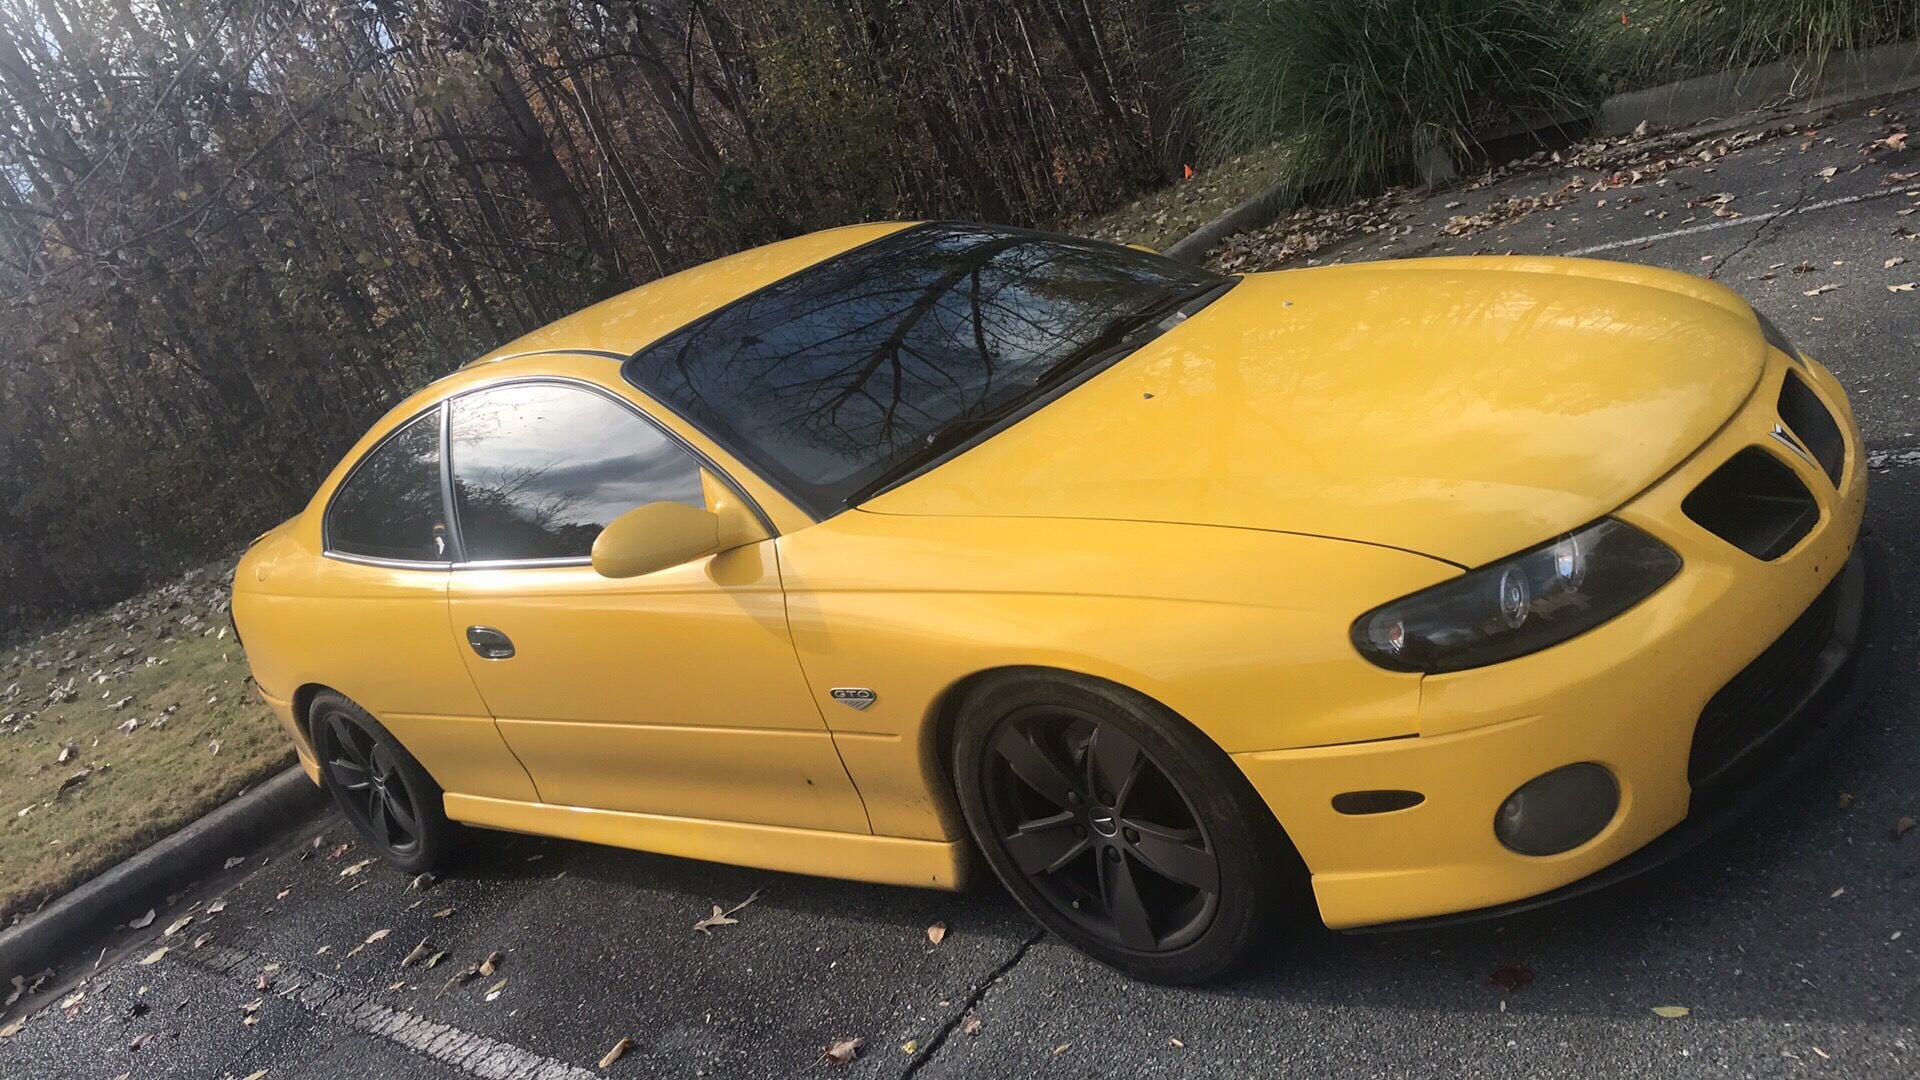  - 2004 gto ls1 full part out - Matthews, NC 28105, United States